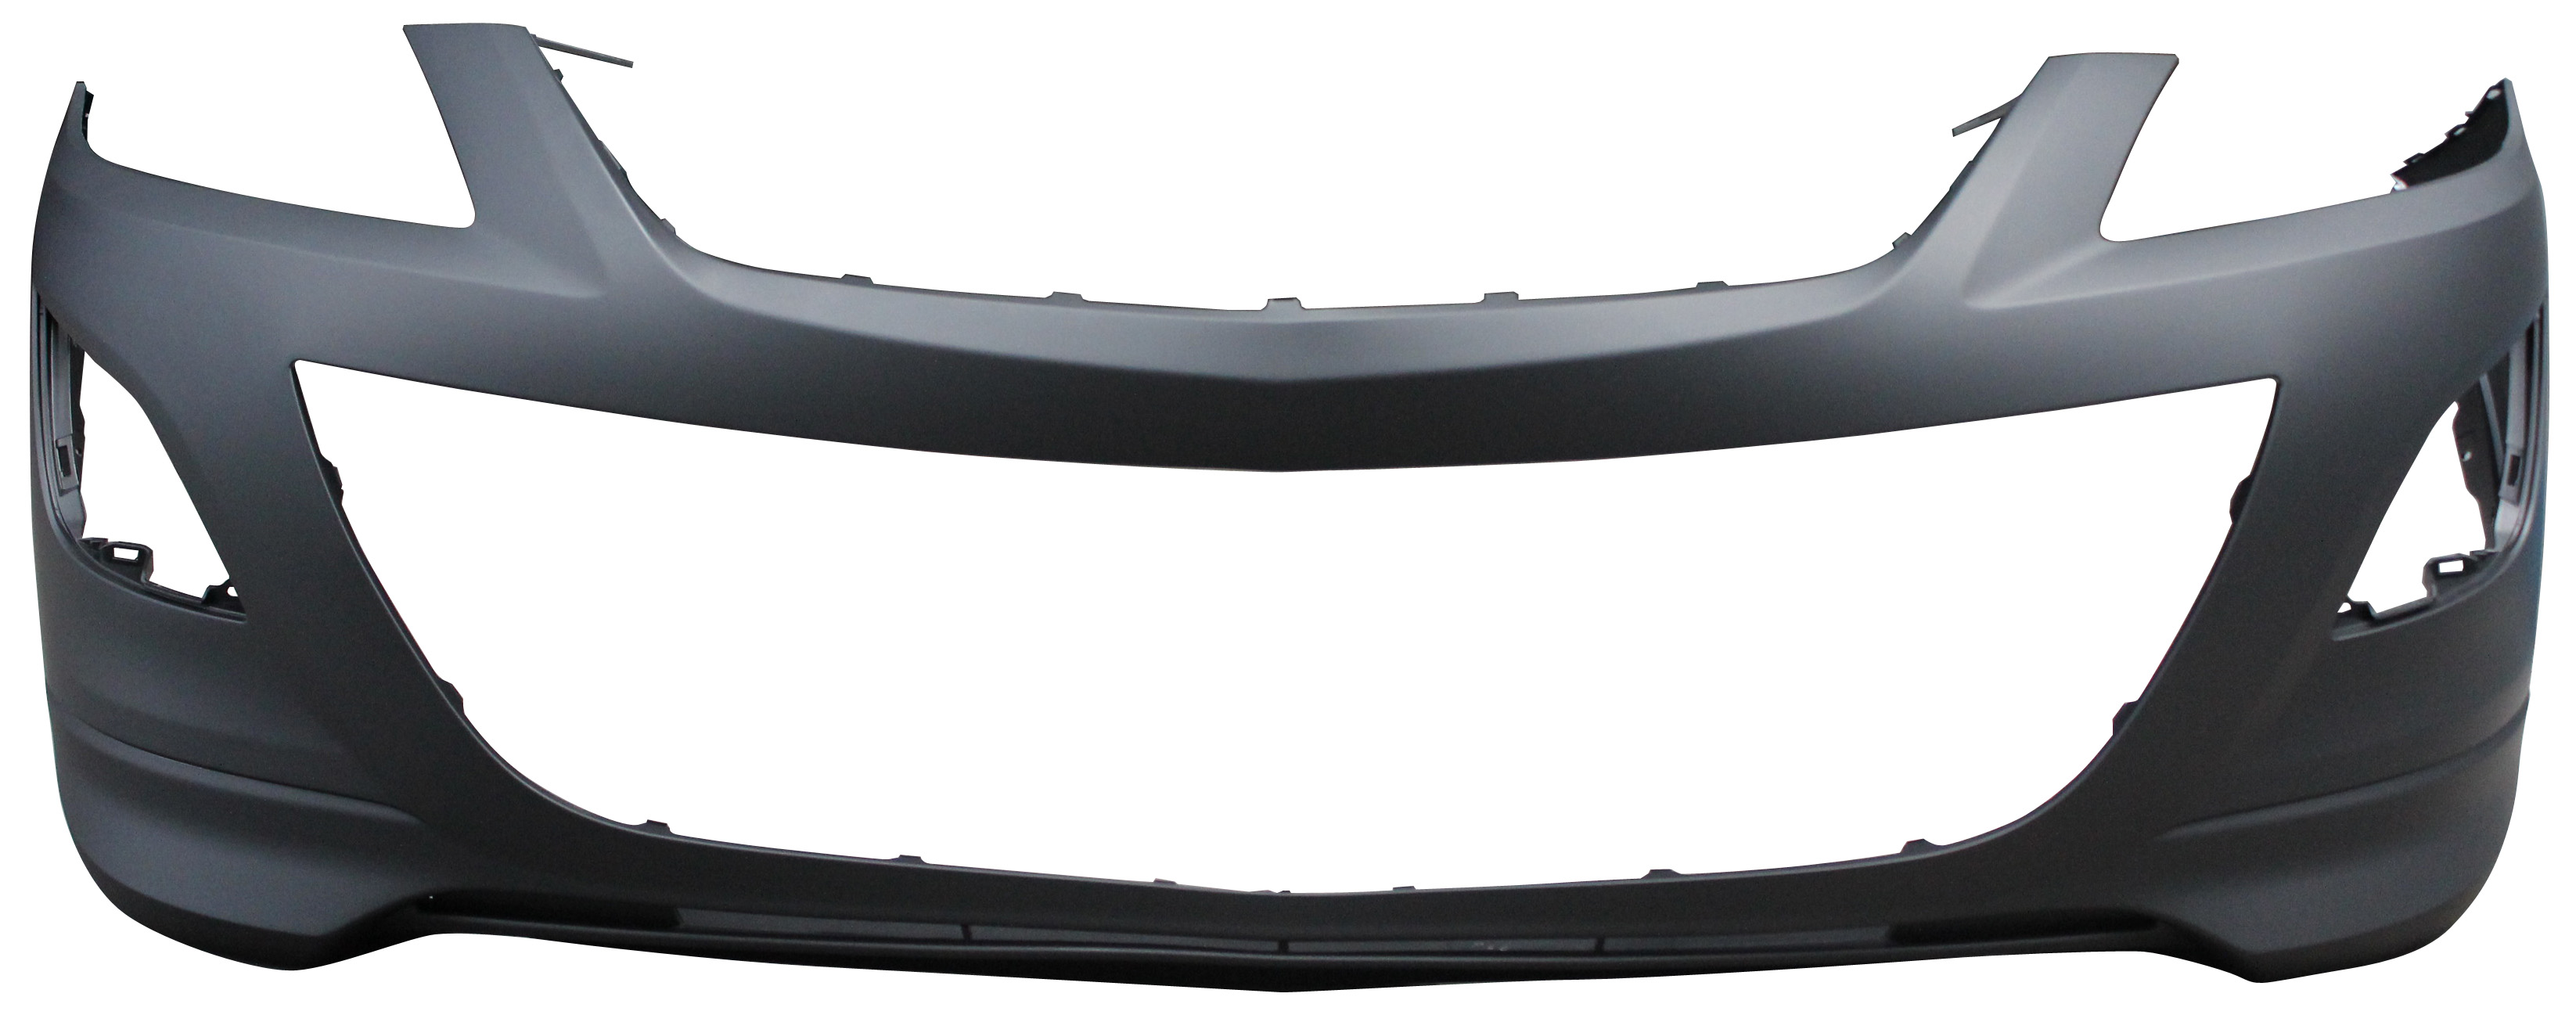 Aftermarket BUMPER COVERS for MAZDA - CX-9, CX-9,10-12,Front bumper cover